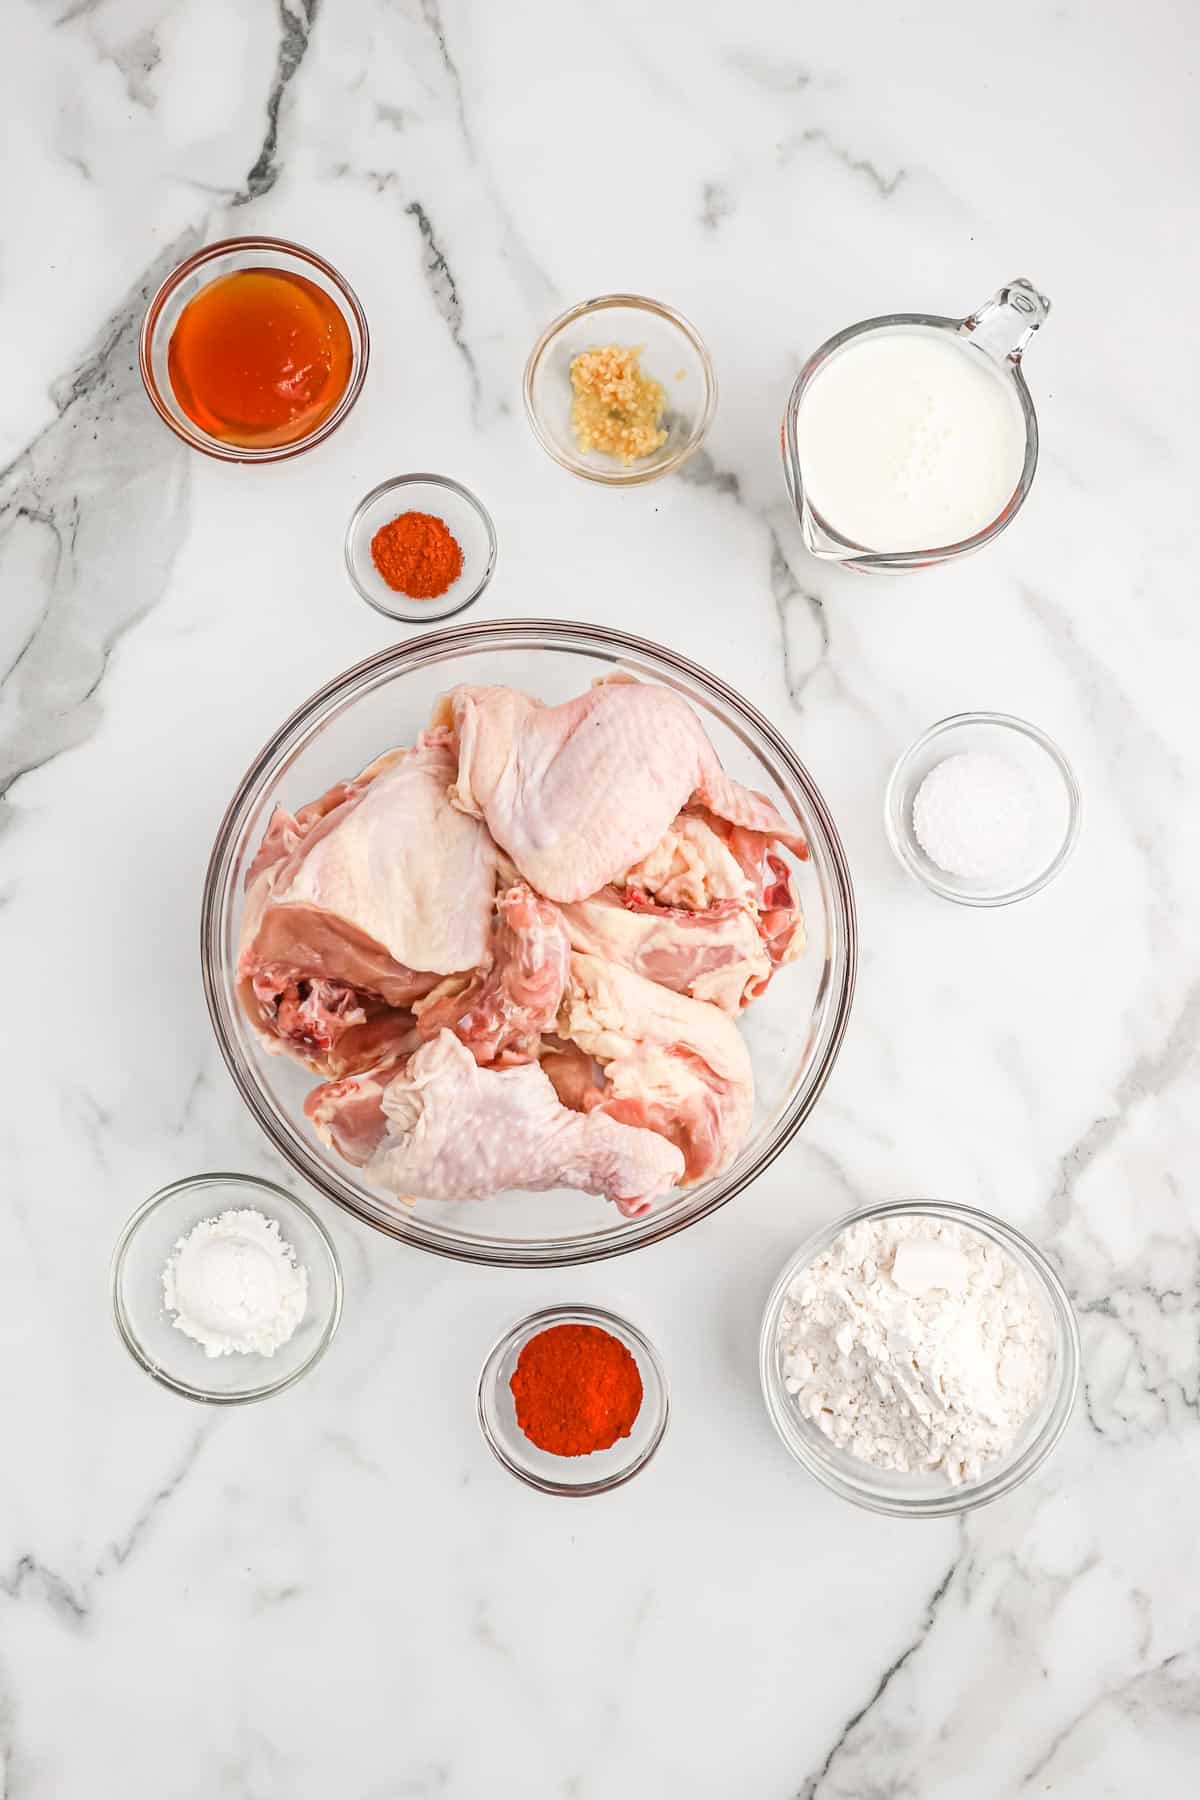 Ingredients to make buttermilk fried chicken on the countertop.